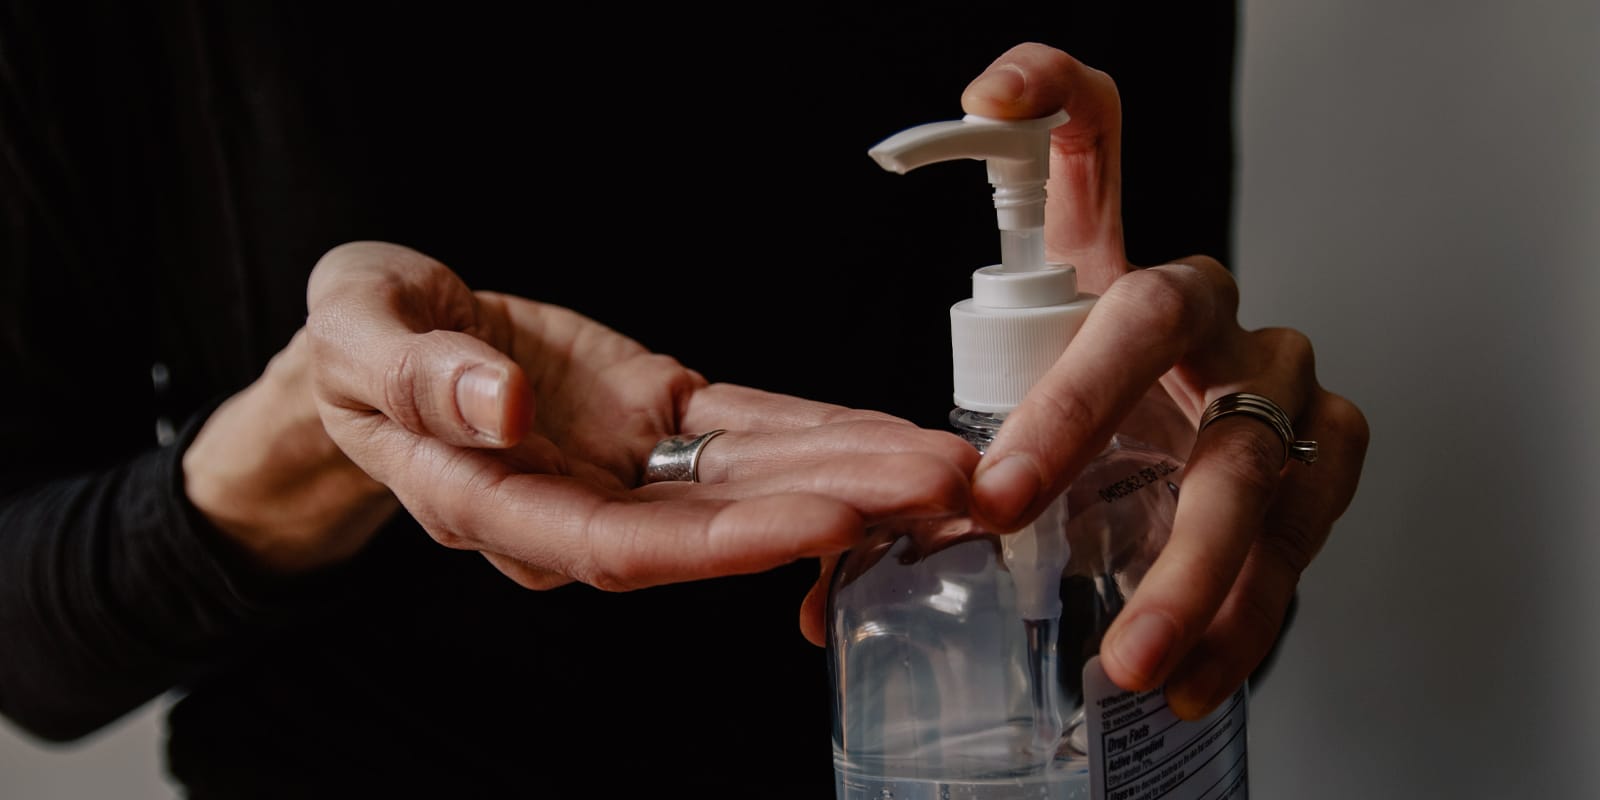 An image of a woman with a sanitiser bottle in her hands